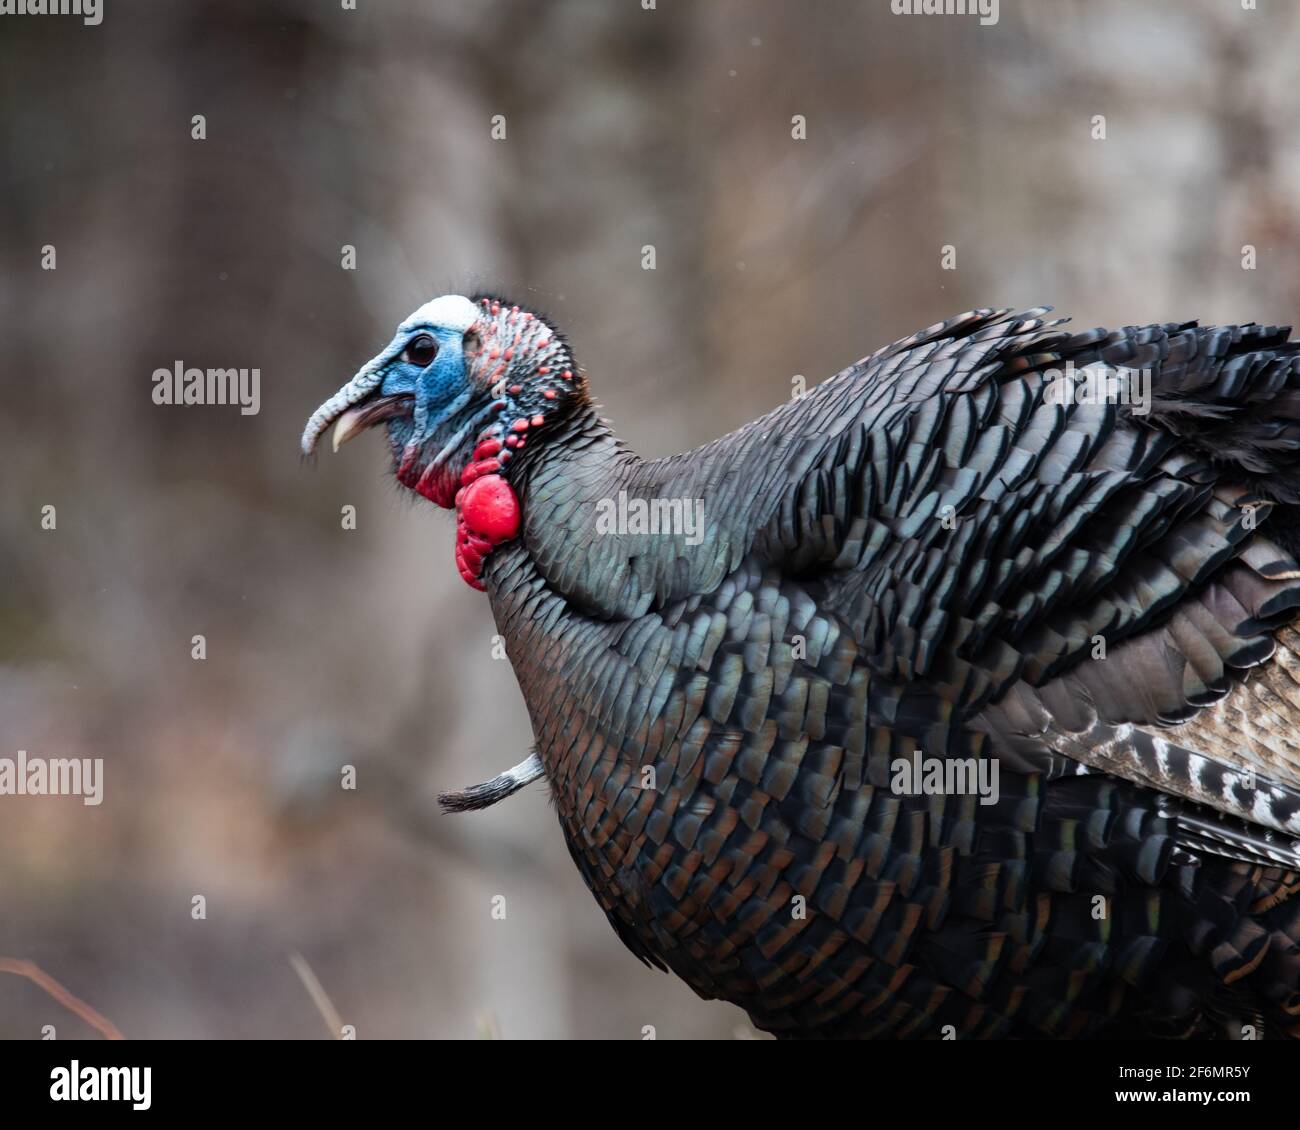 Close up of an Eastern wild tom turkey, Meleagris gallopavo, in early breeding season with a brightly colored wattle and head. Stock Photo